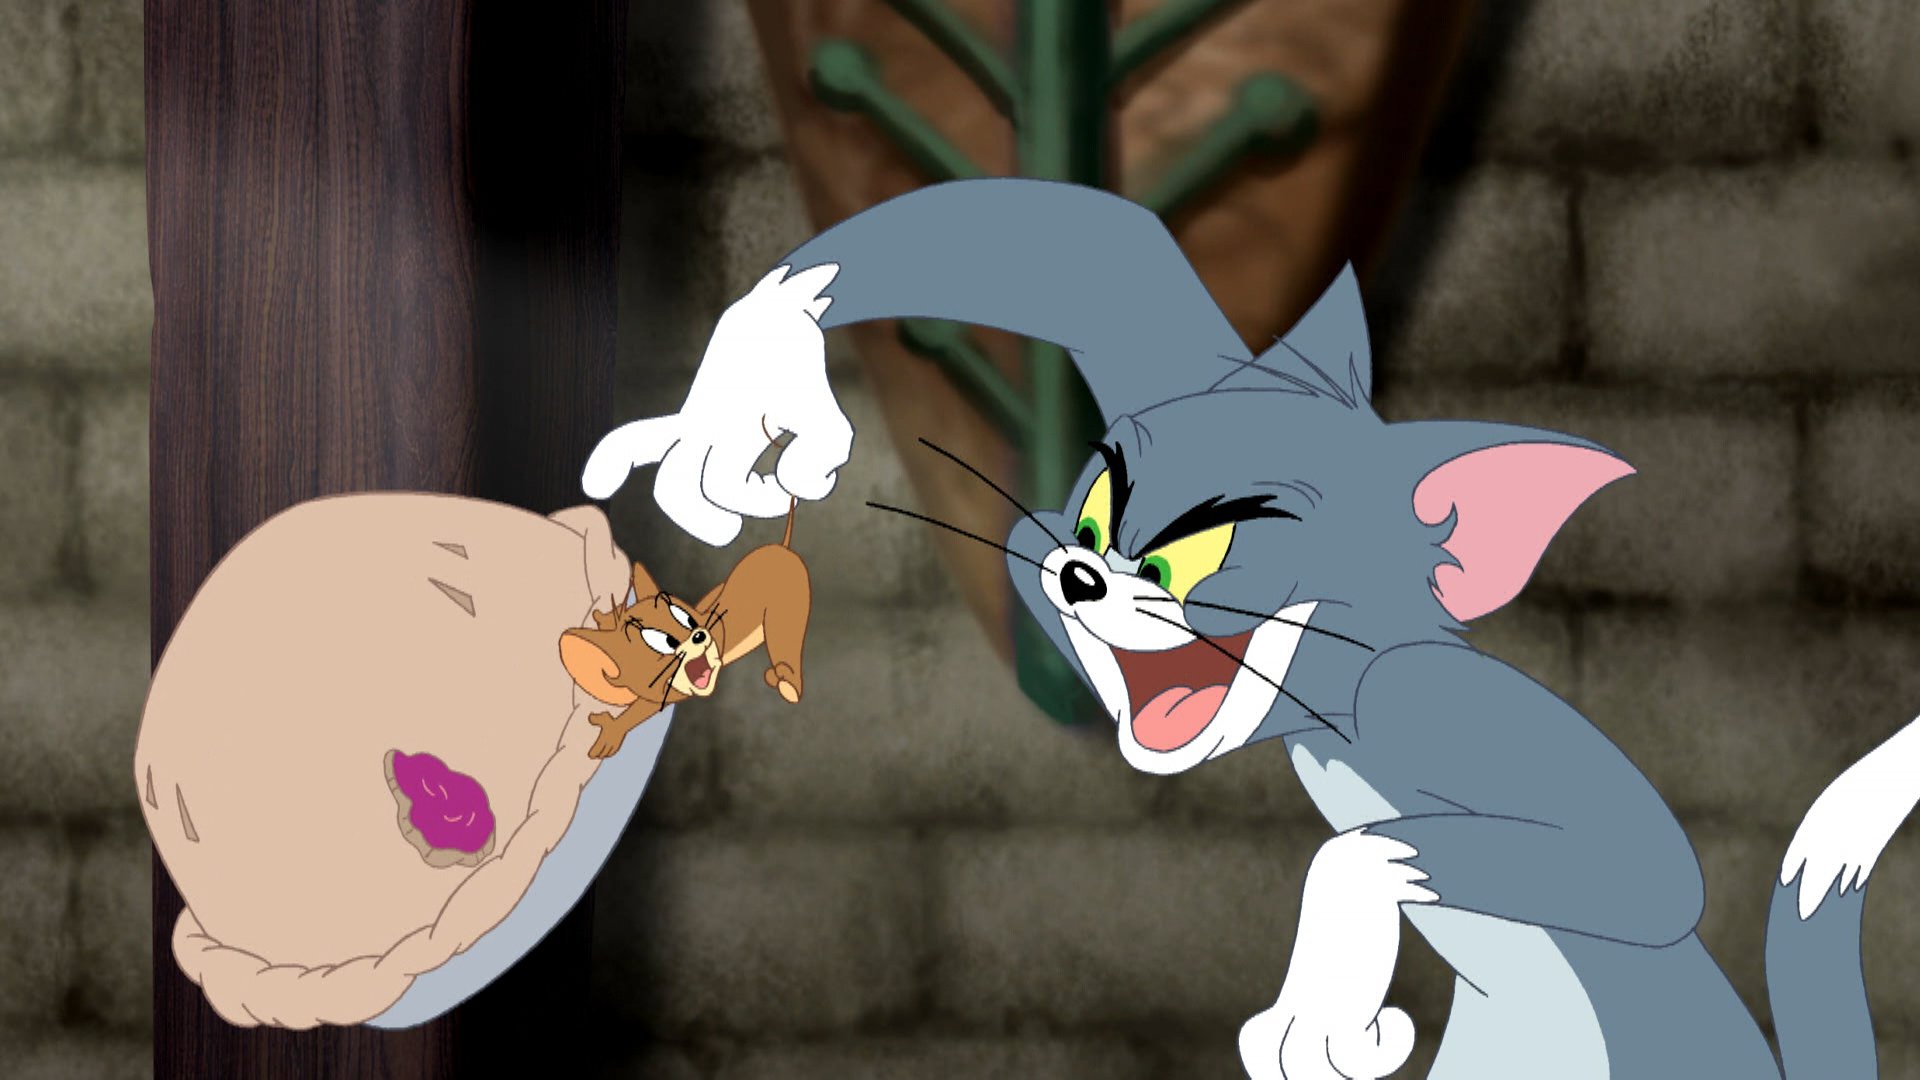 download tom and jerry full episode batch